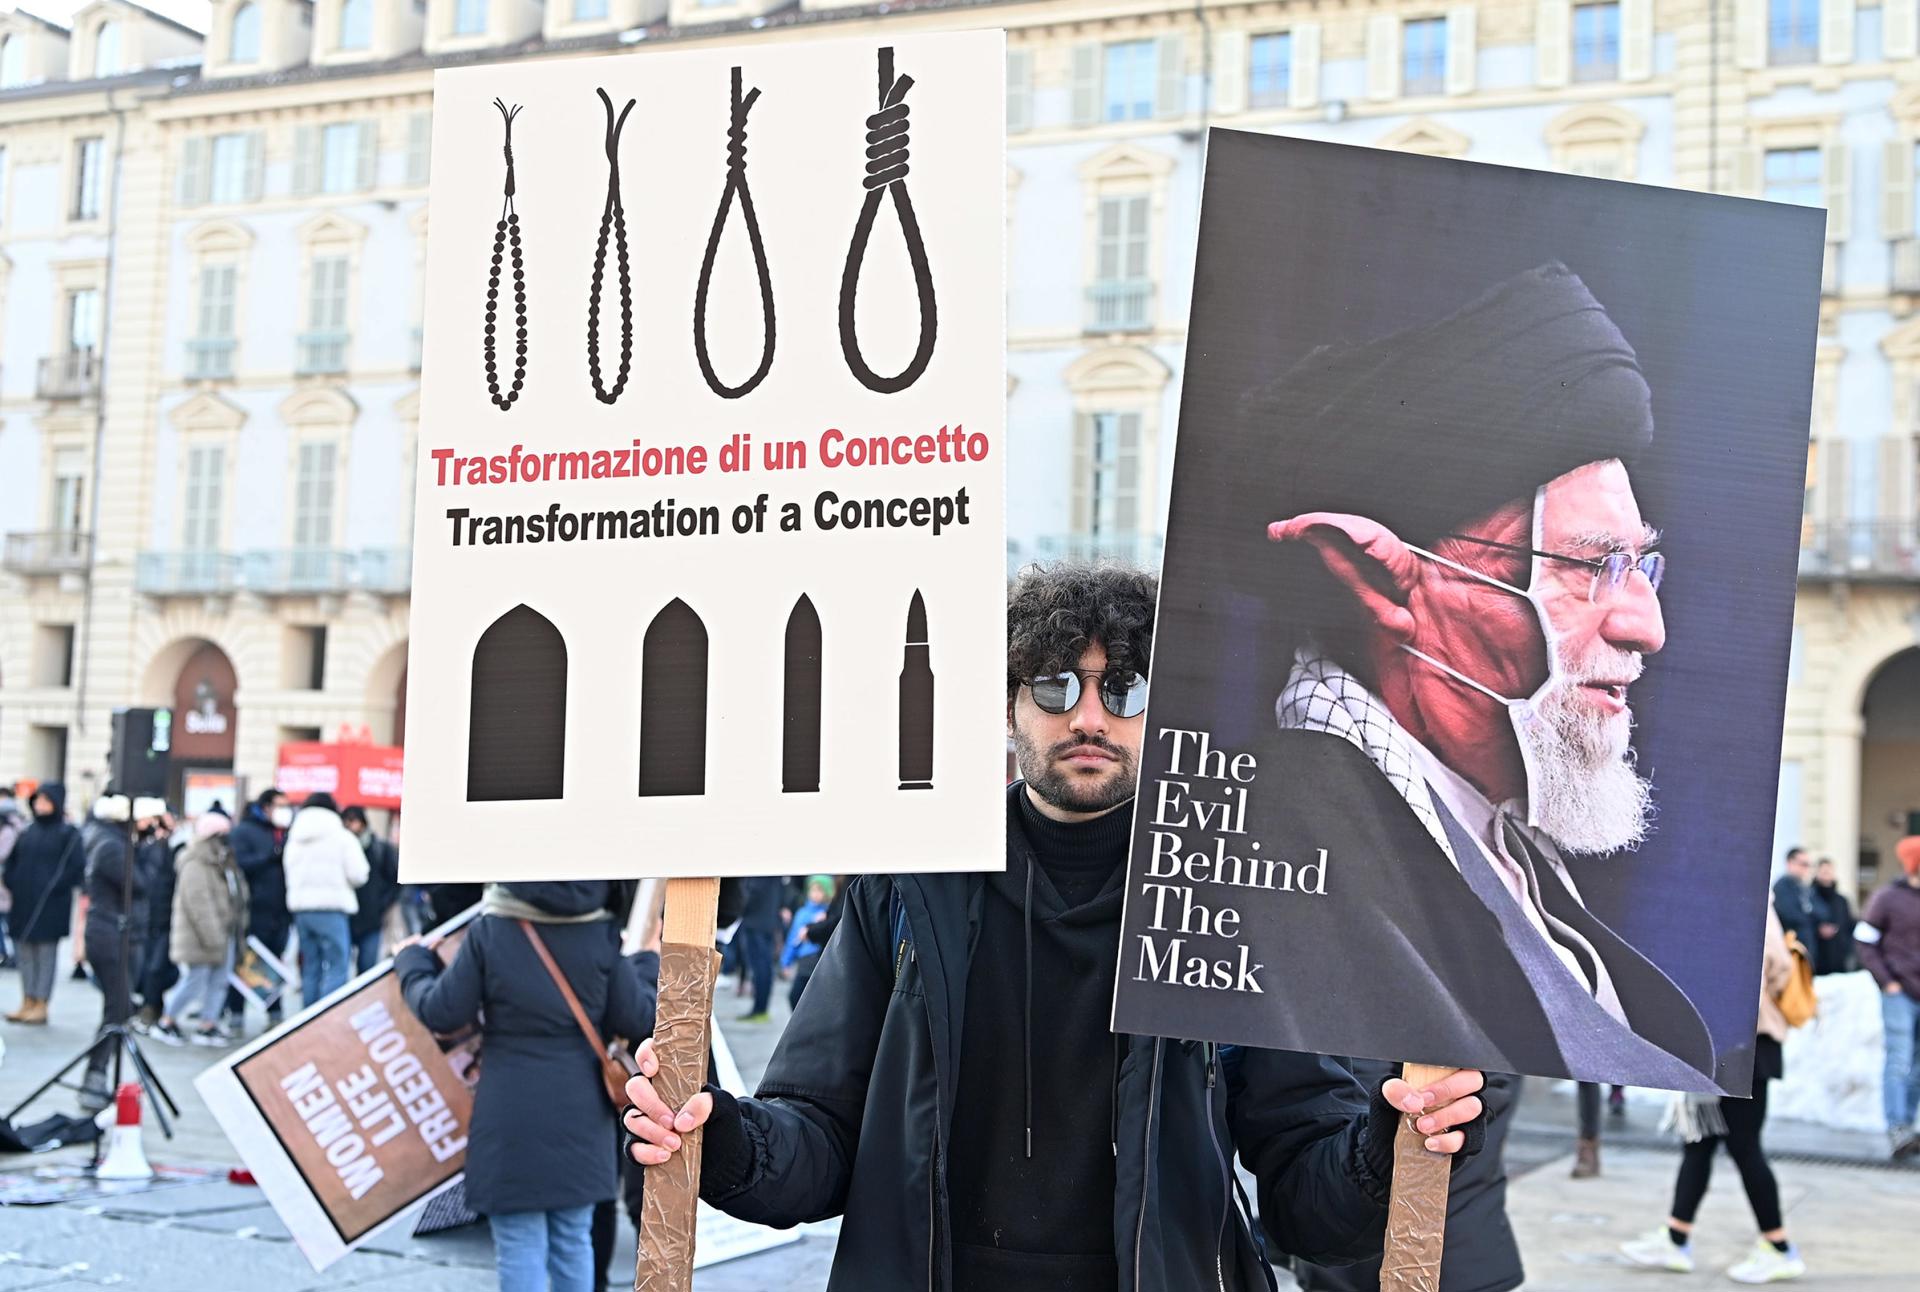 A protester holds placards during a demonstration against Iran's regime staged by the Iranian community, in Turin, Italy, 17 December 2022, following Iran's sentencing to death and public execution of two young demonstrators, Mohsen Shekari and Majidreza Rahnavard, for participating in demonstrations against the regime. EFE-EPA FILE/ALESSANDRO DI MARCO
